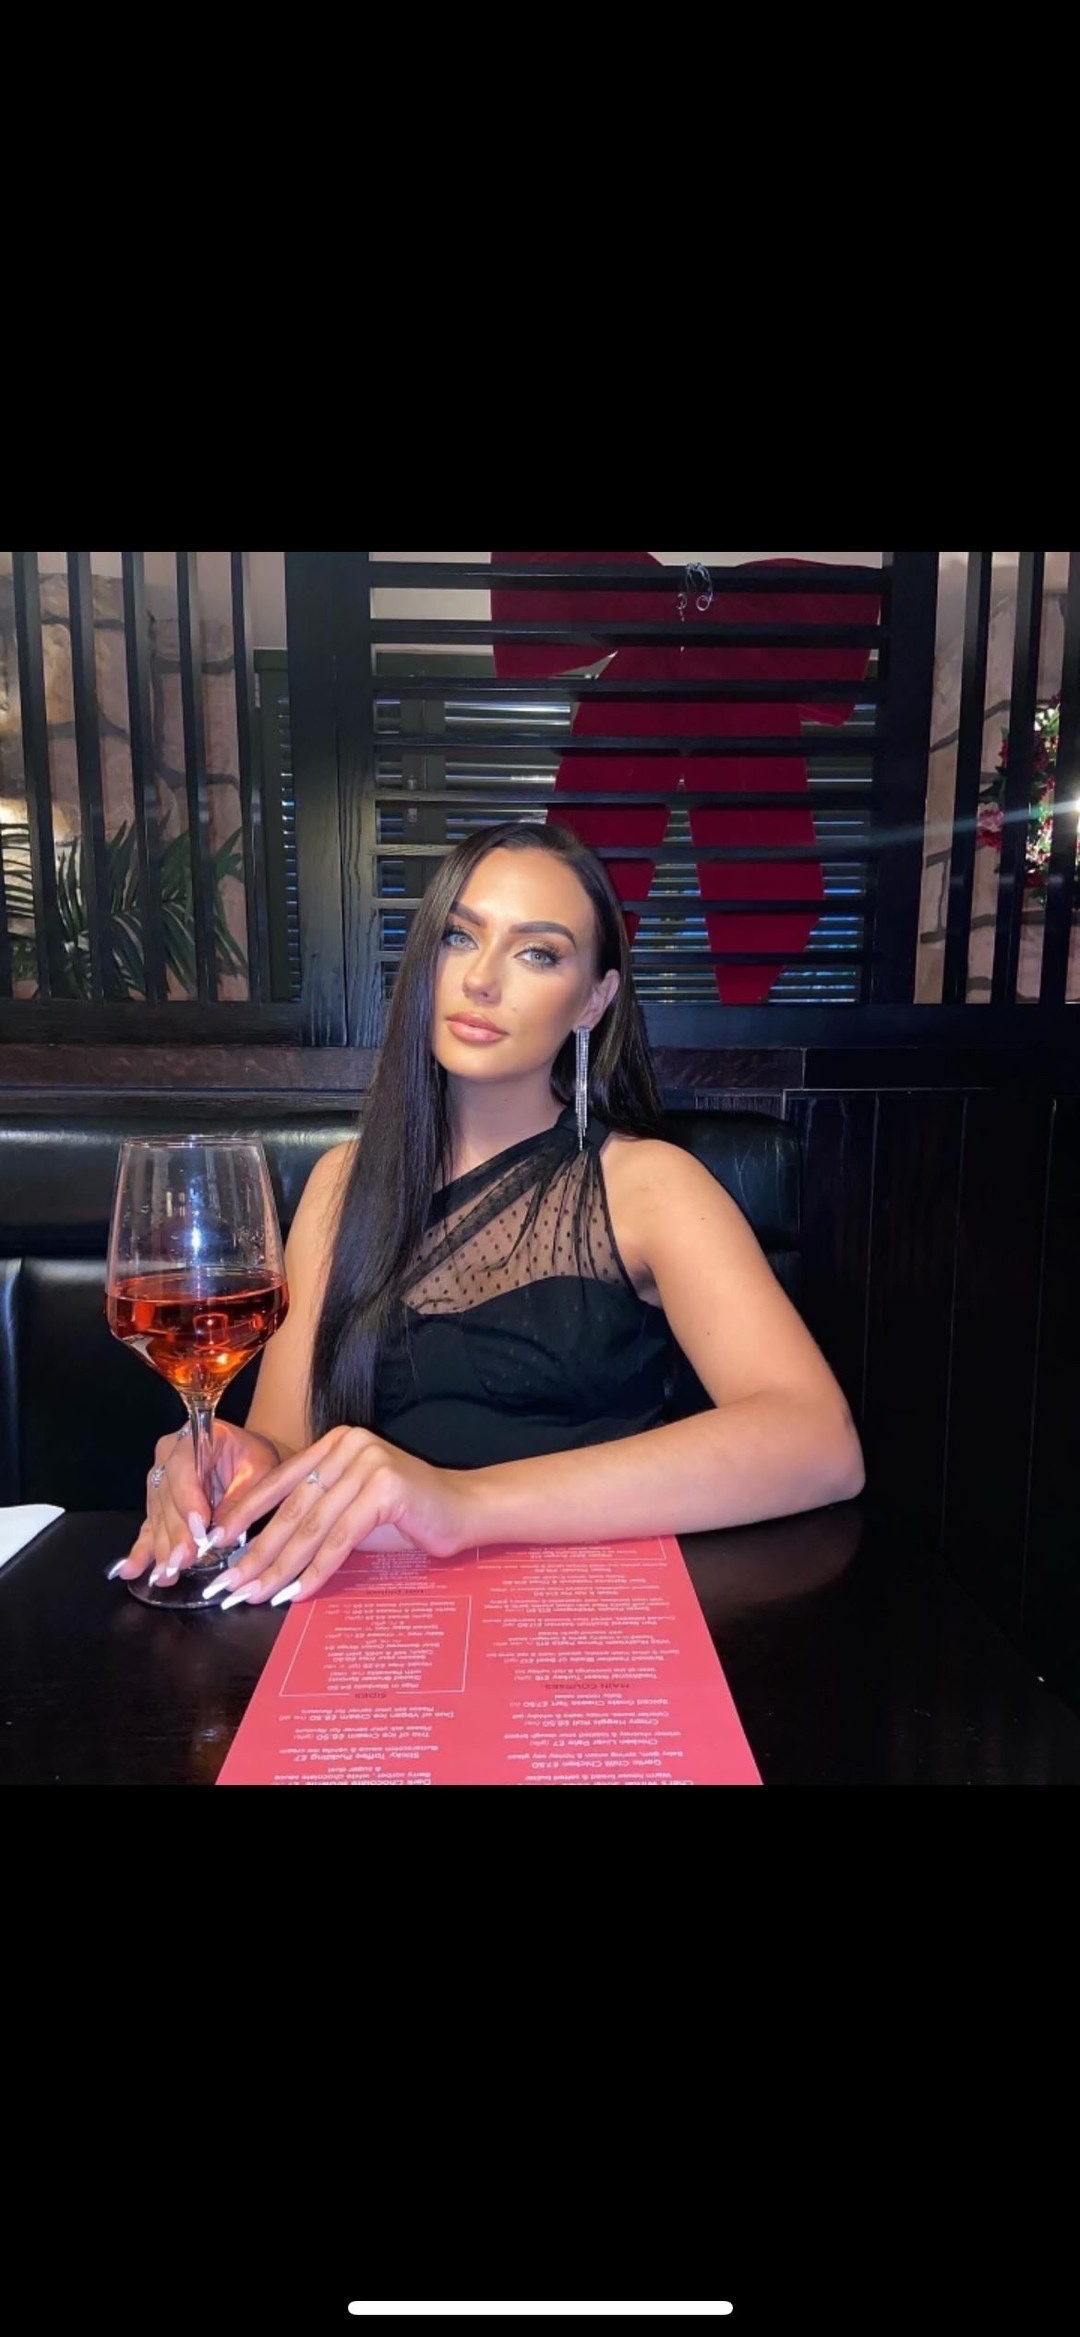  Nadia Bella Allan: Everything I do it with pure intentions and a good heart, I put my all into everything that’s important to me and I care about people and their welfare.